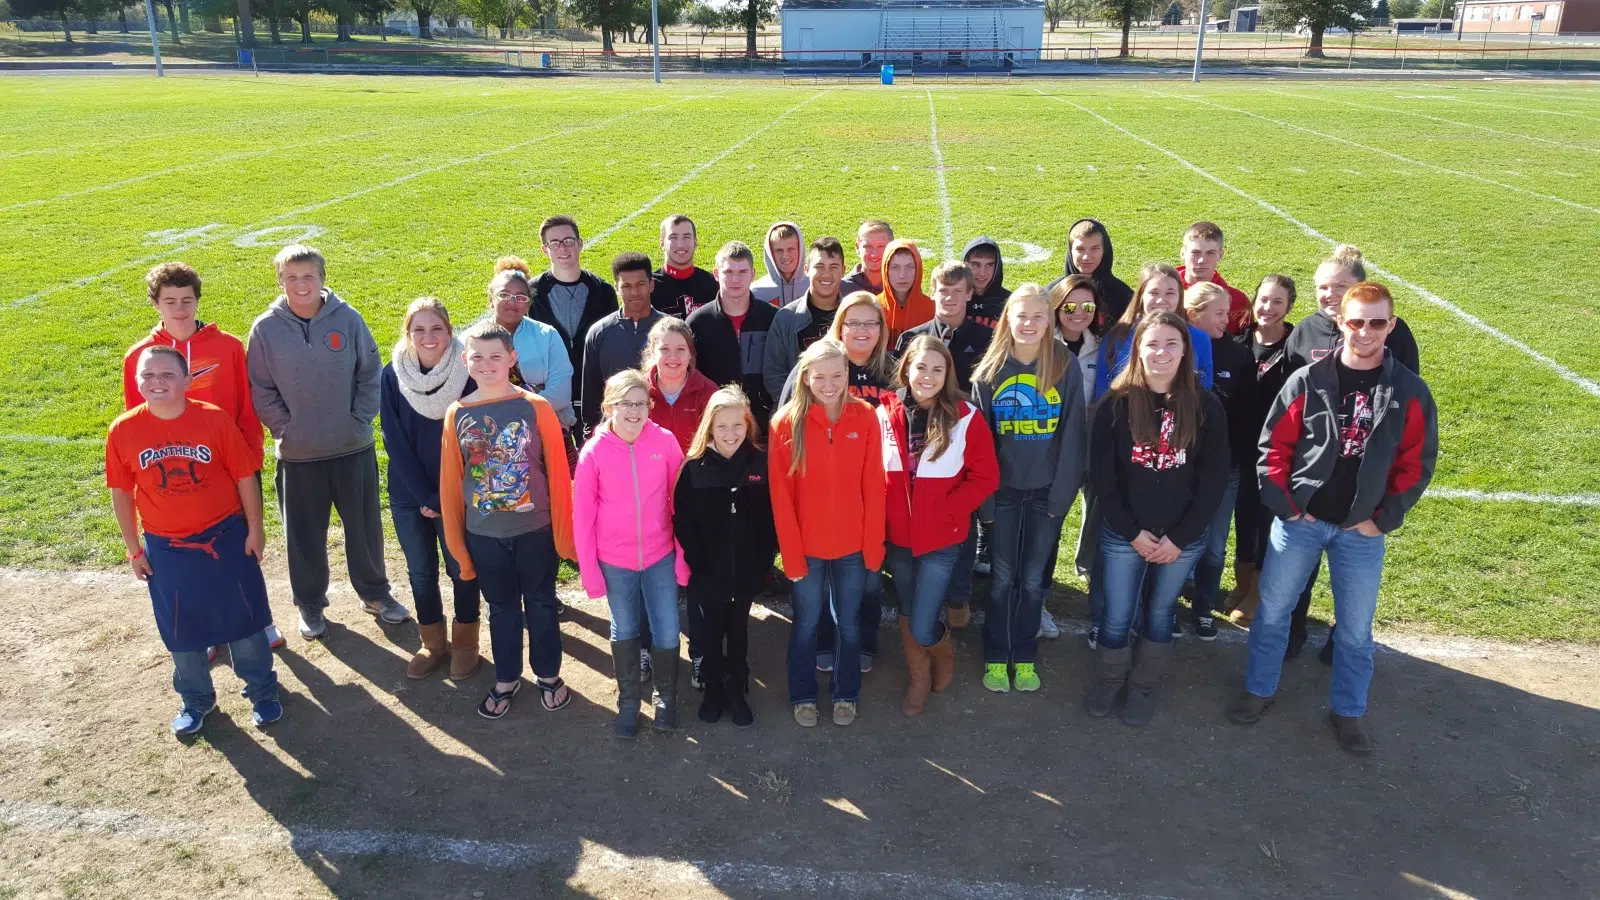 Vandalia & Pana HS Athletes join together for FCA event 